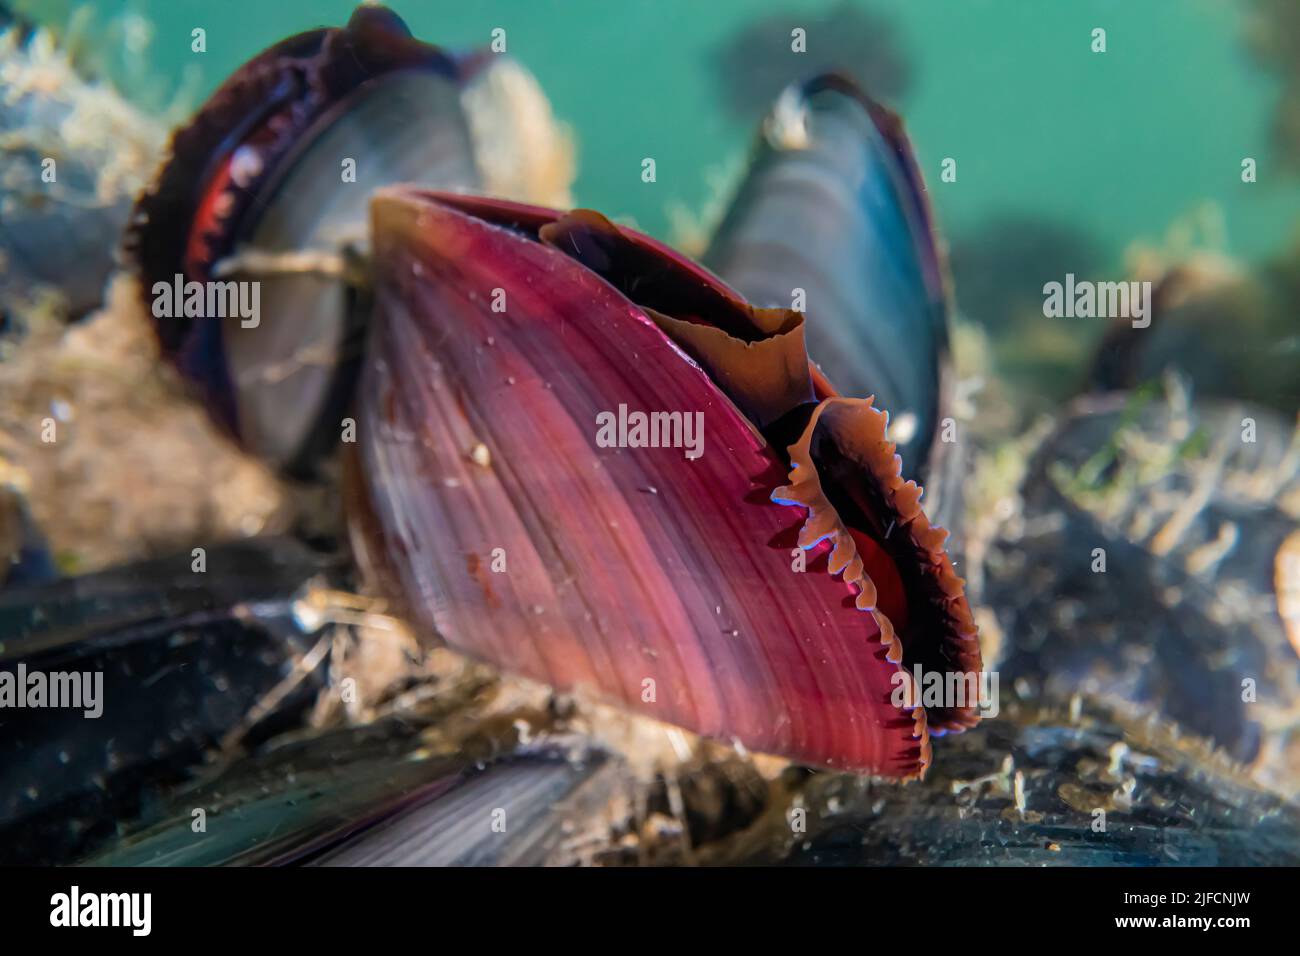 Blue Mussell, Mytilus trossulus, shells open and filter feeding on a dock in Jarrell Cove State Park, Washington State, USA Stock Photo